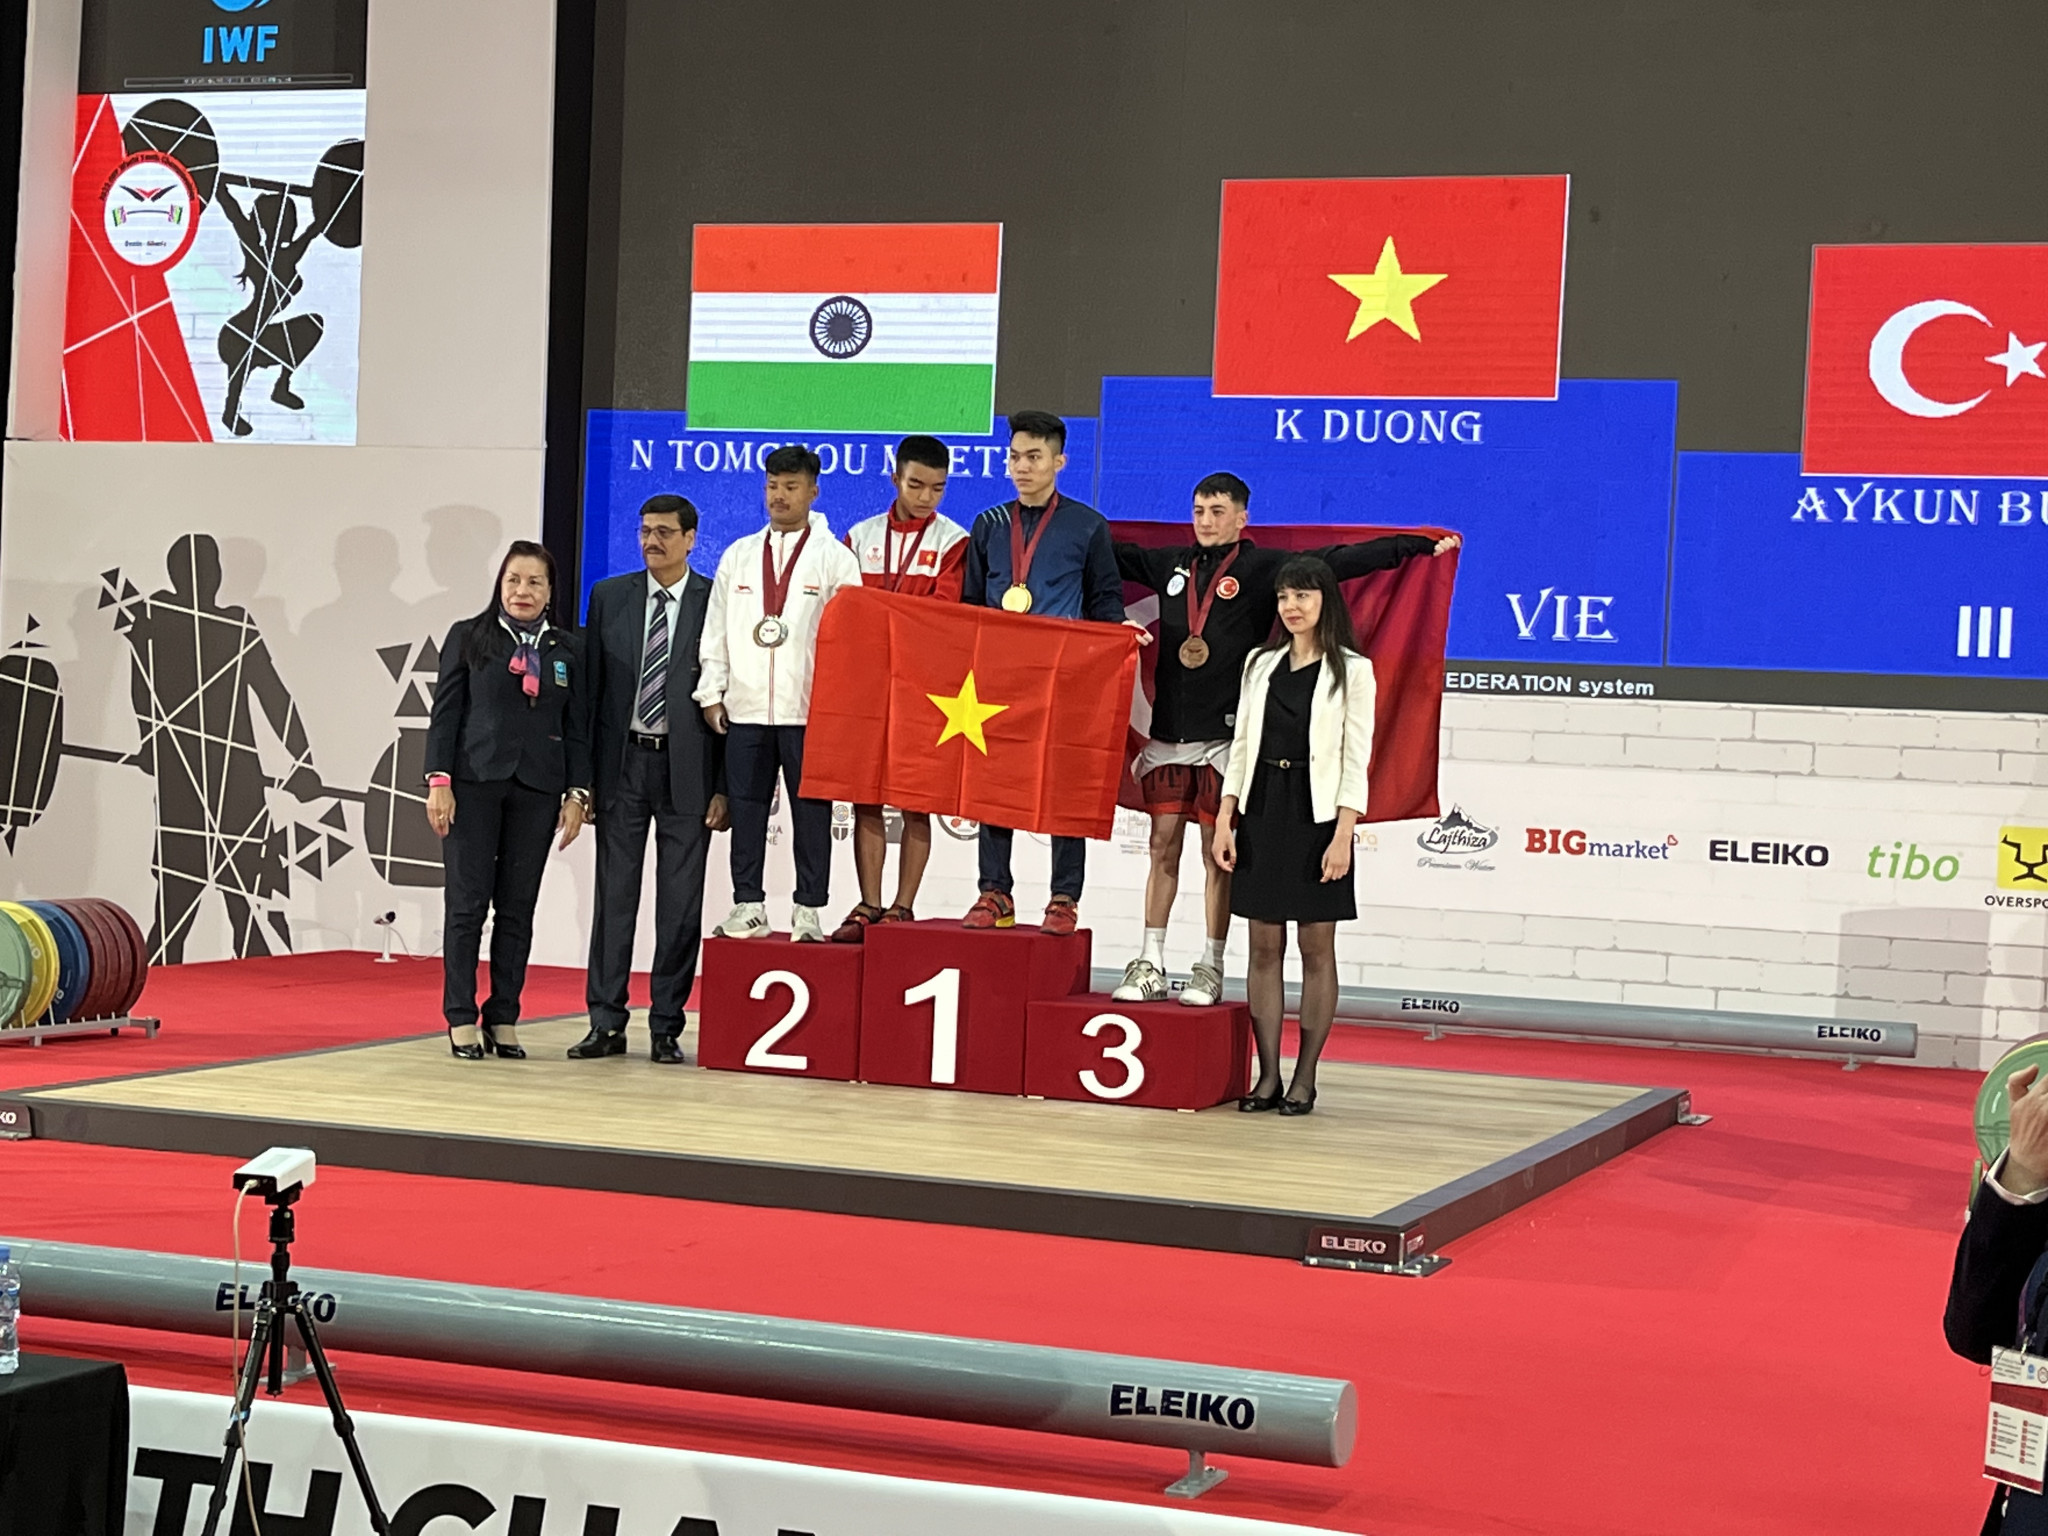 K Duong of Vietnam broke all three of his own youth world records in winning the men's 55kg ©ITG